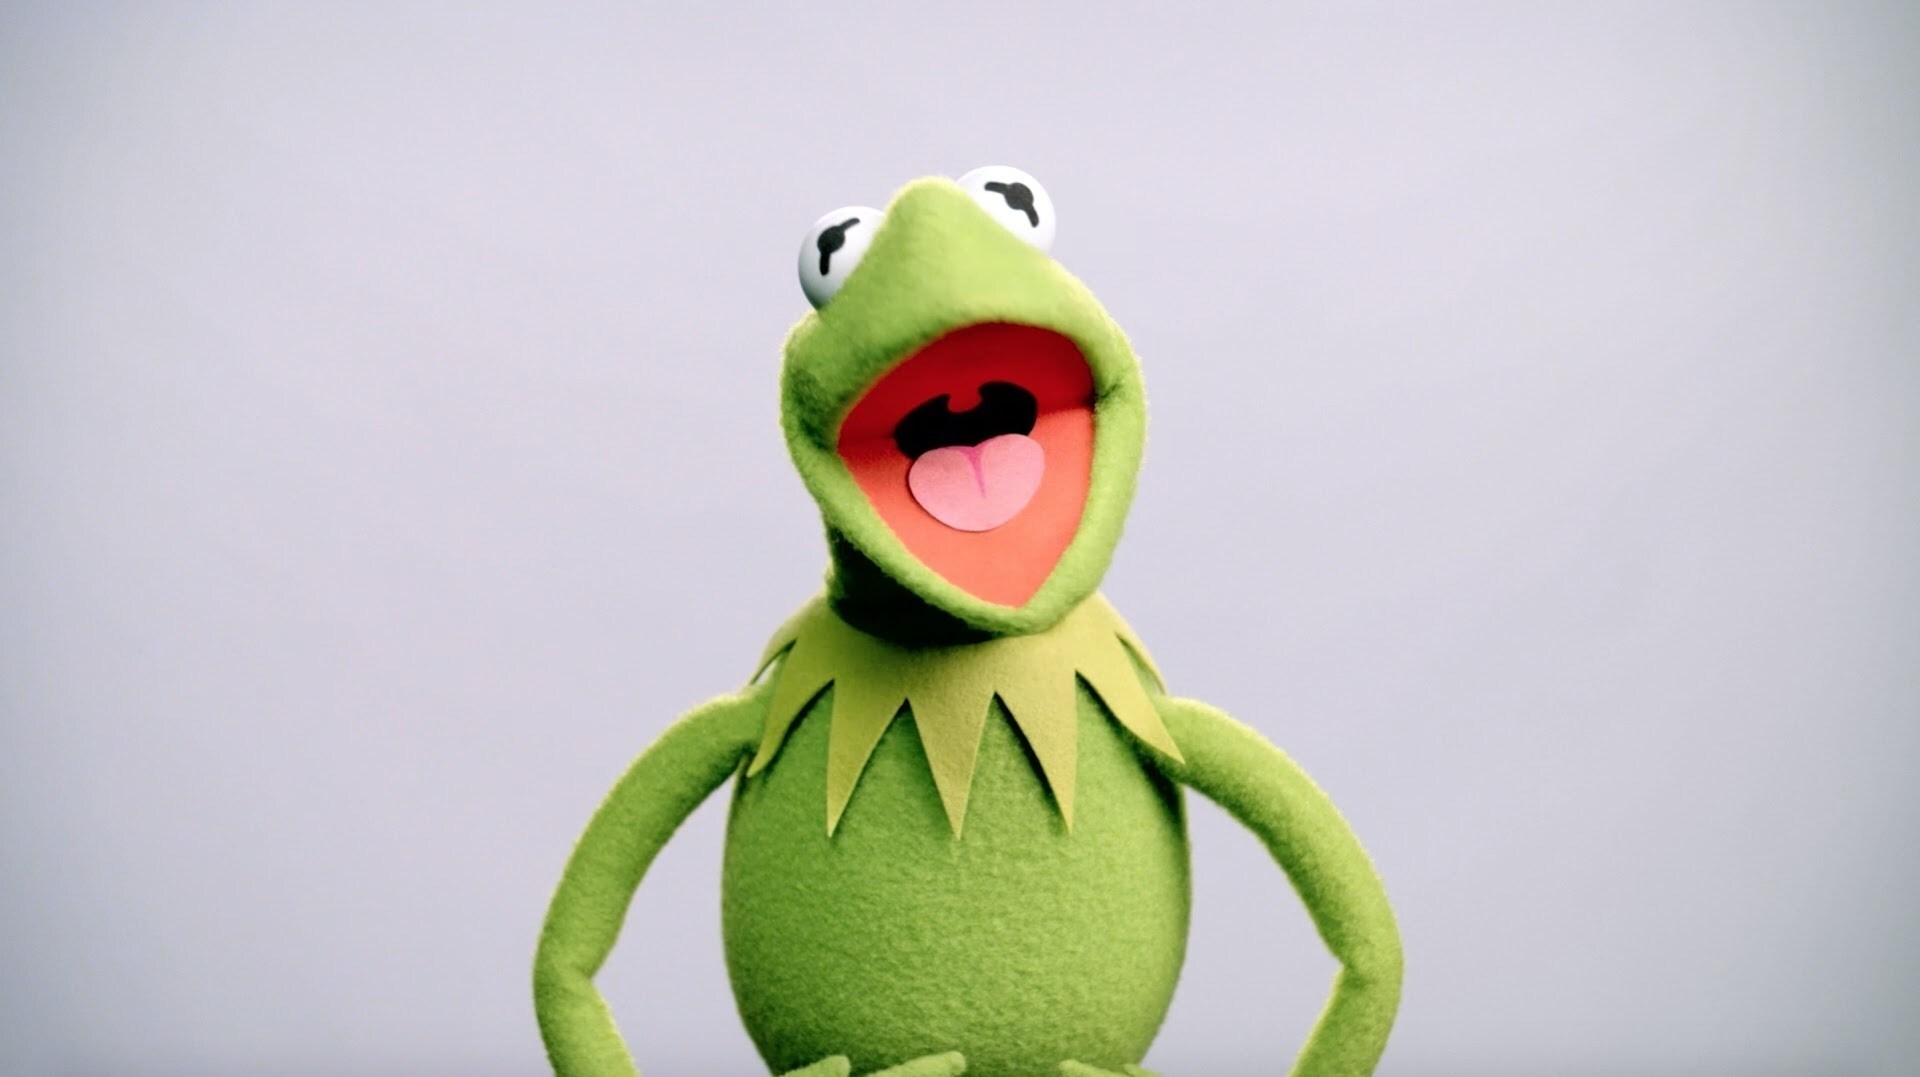 Kermit the Frog Buzzes In | Muppet Thought of the Week by The Muppets